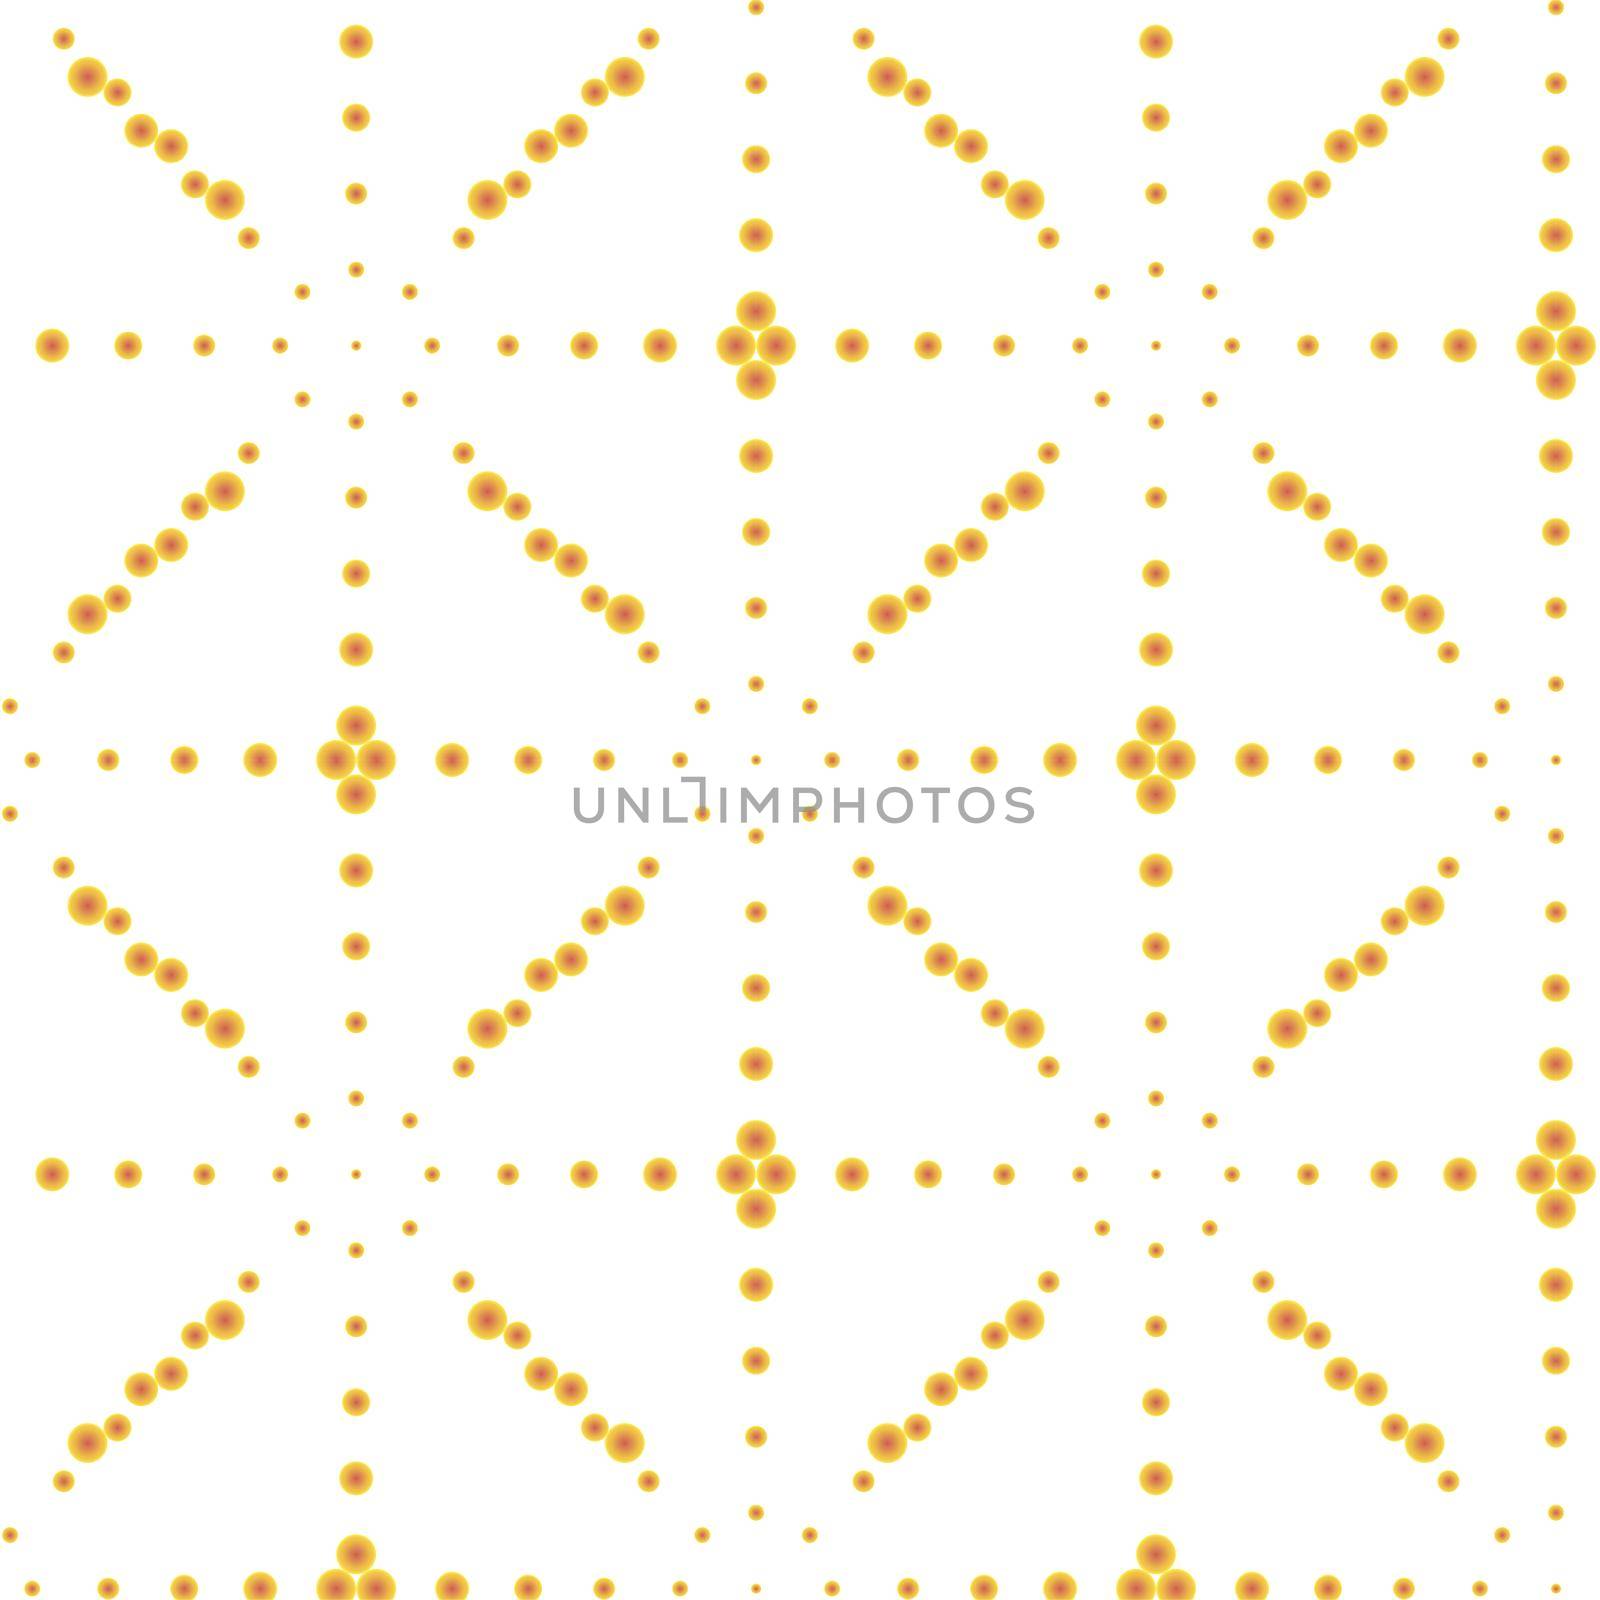 illustration of geometric shapes pattern for printing, textile, wallpaper and interior designs by Photochowk